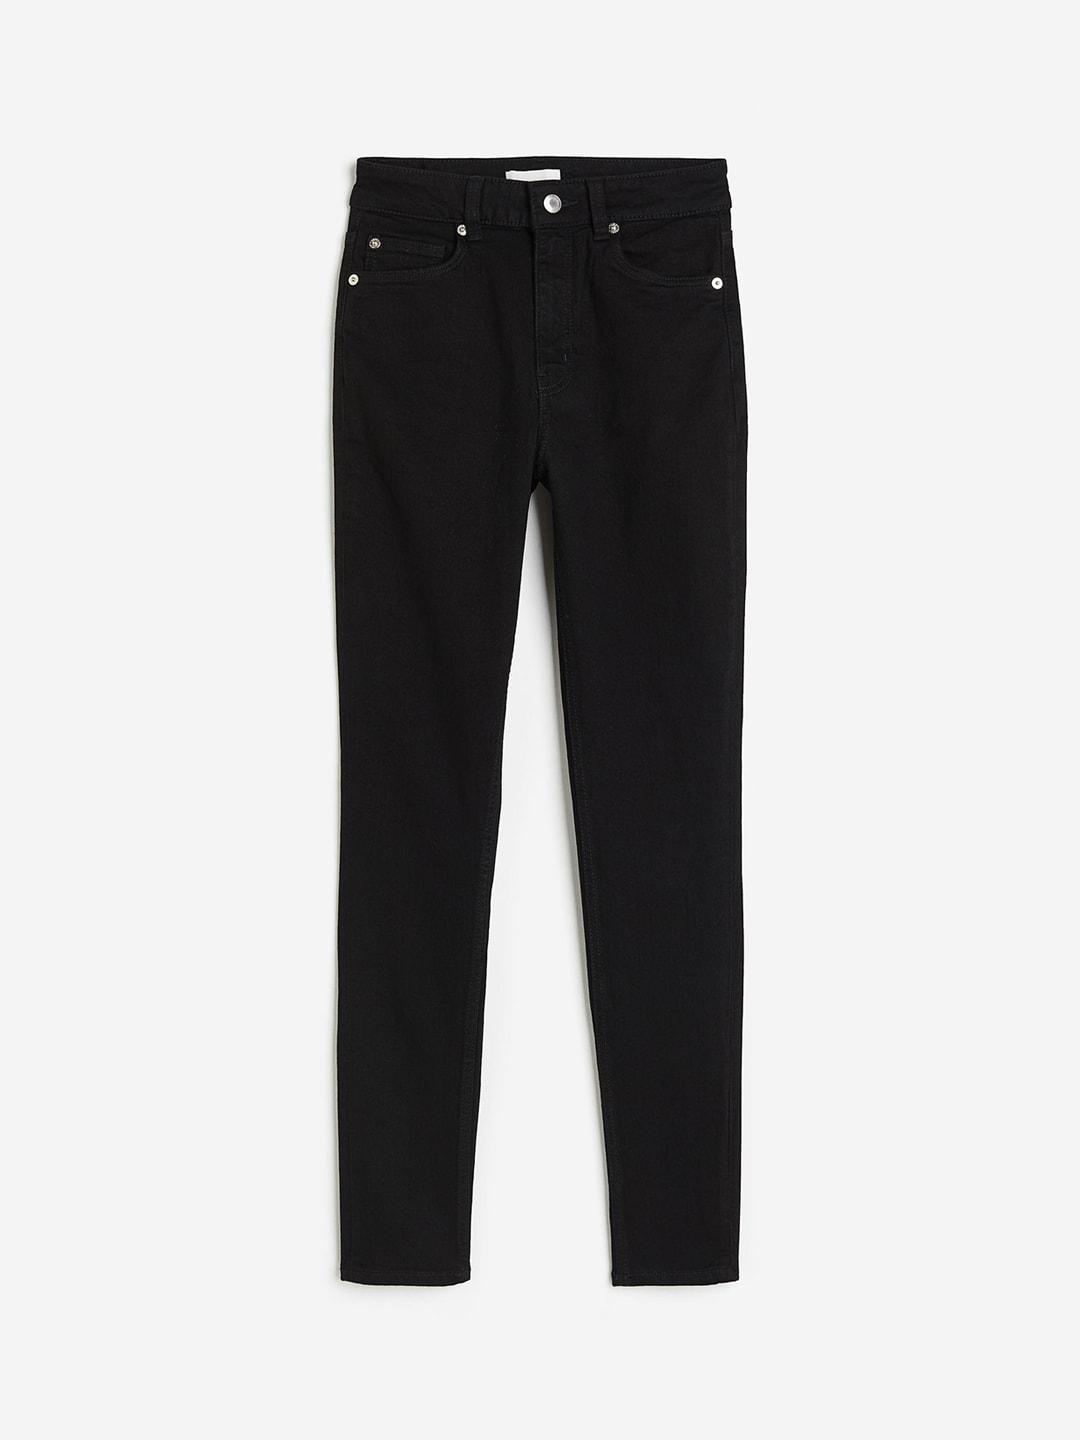 H&M Women Skinny Fit High-Rise Jeans